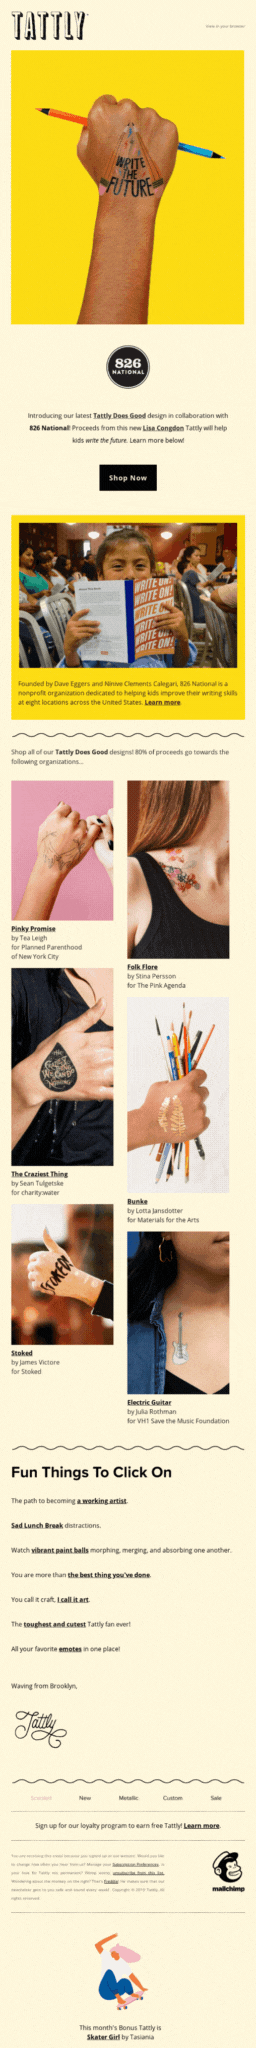 An email from Tattly